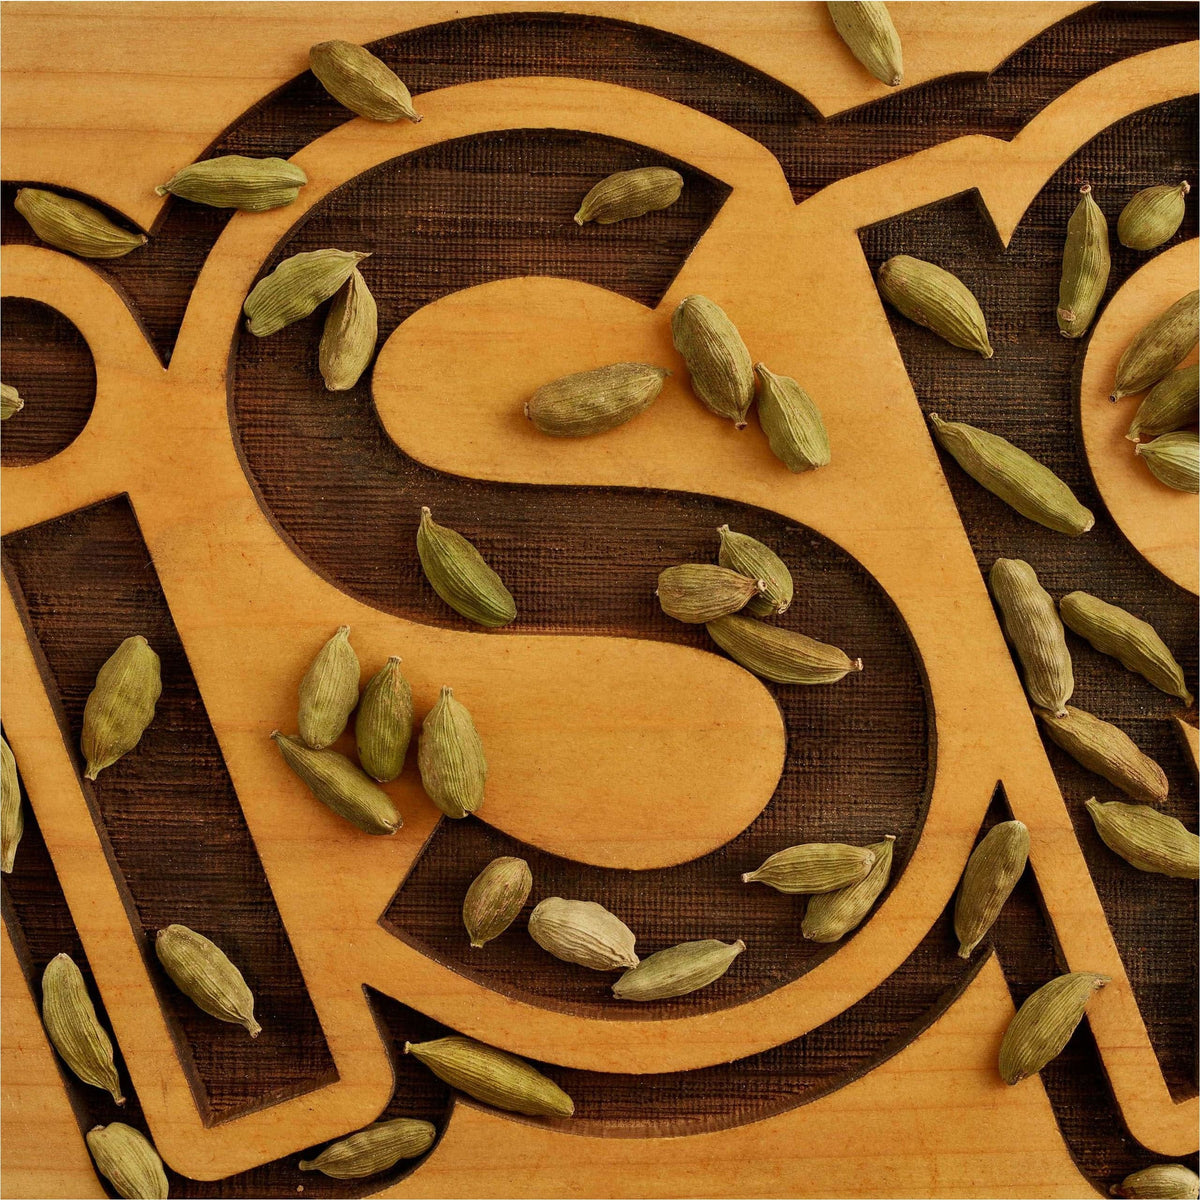 The Best Cardamom Seed Whole for Curries, Desserts and More